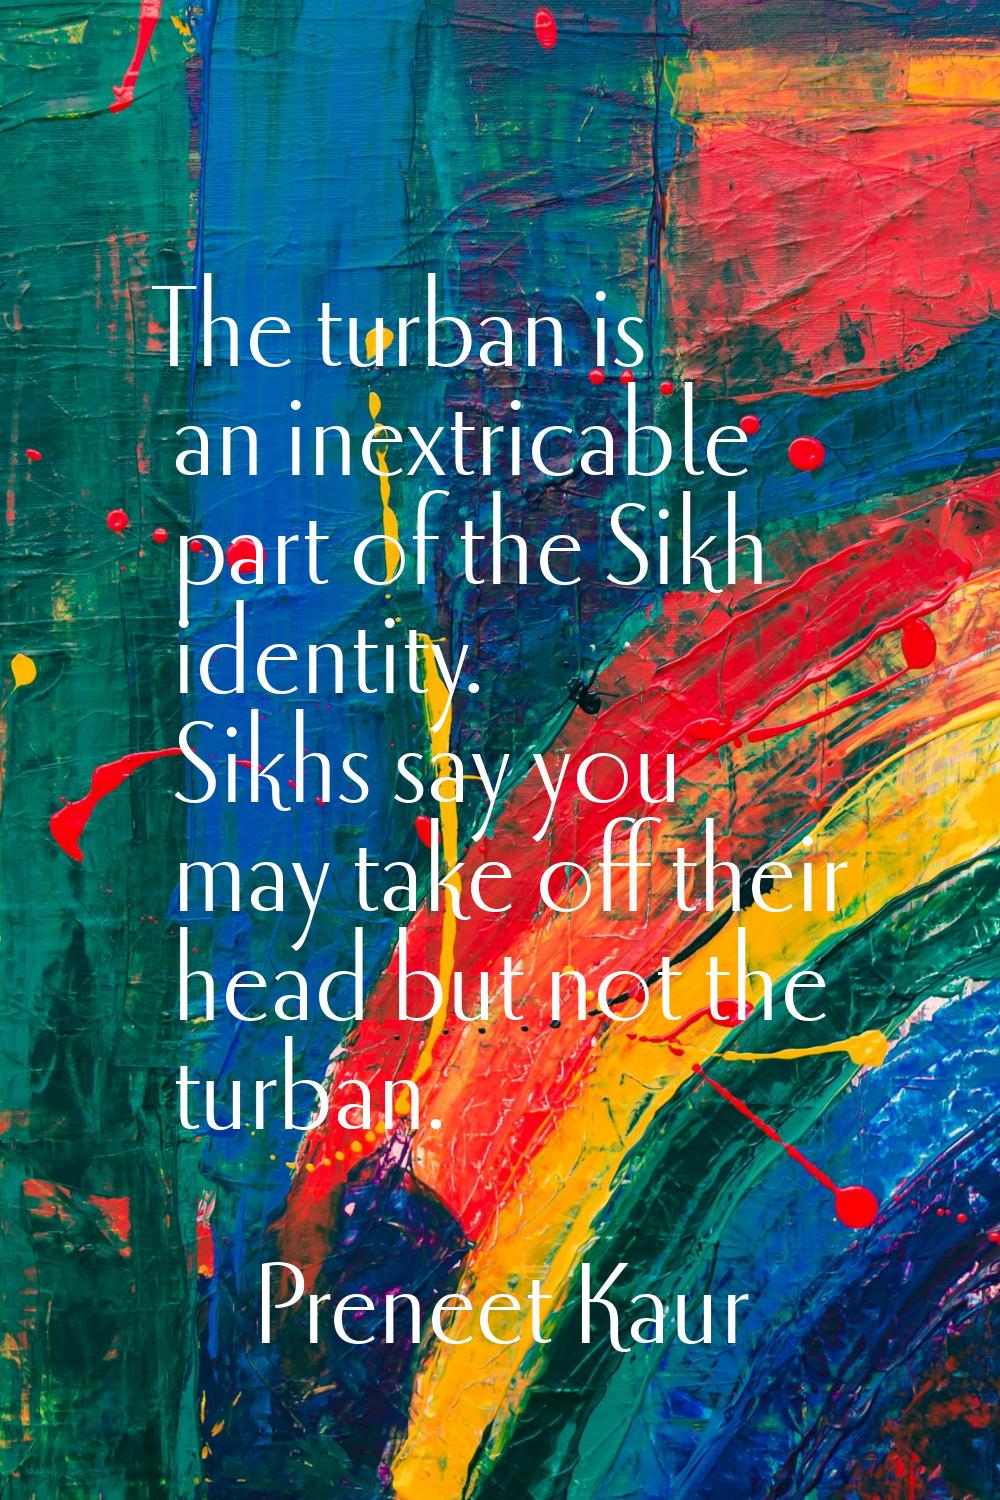 The turban is an inextricable part of the Sikh identity. Sikhs say you may take off their head but 